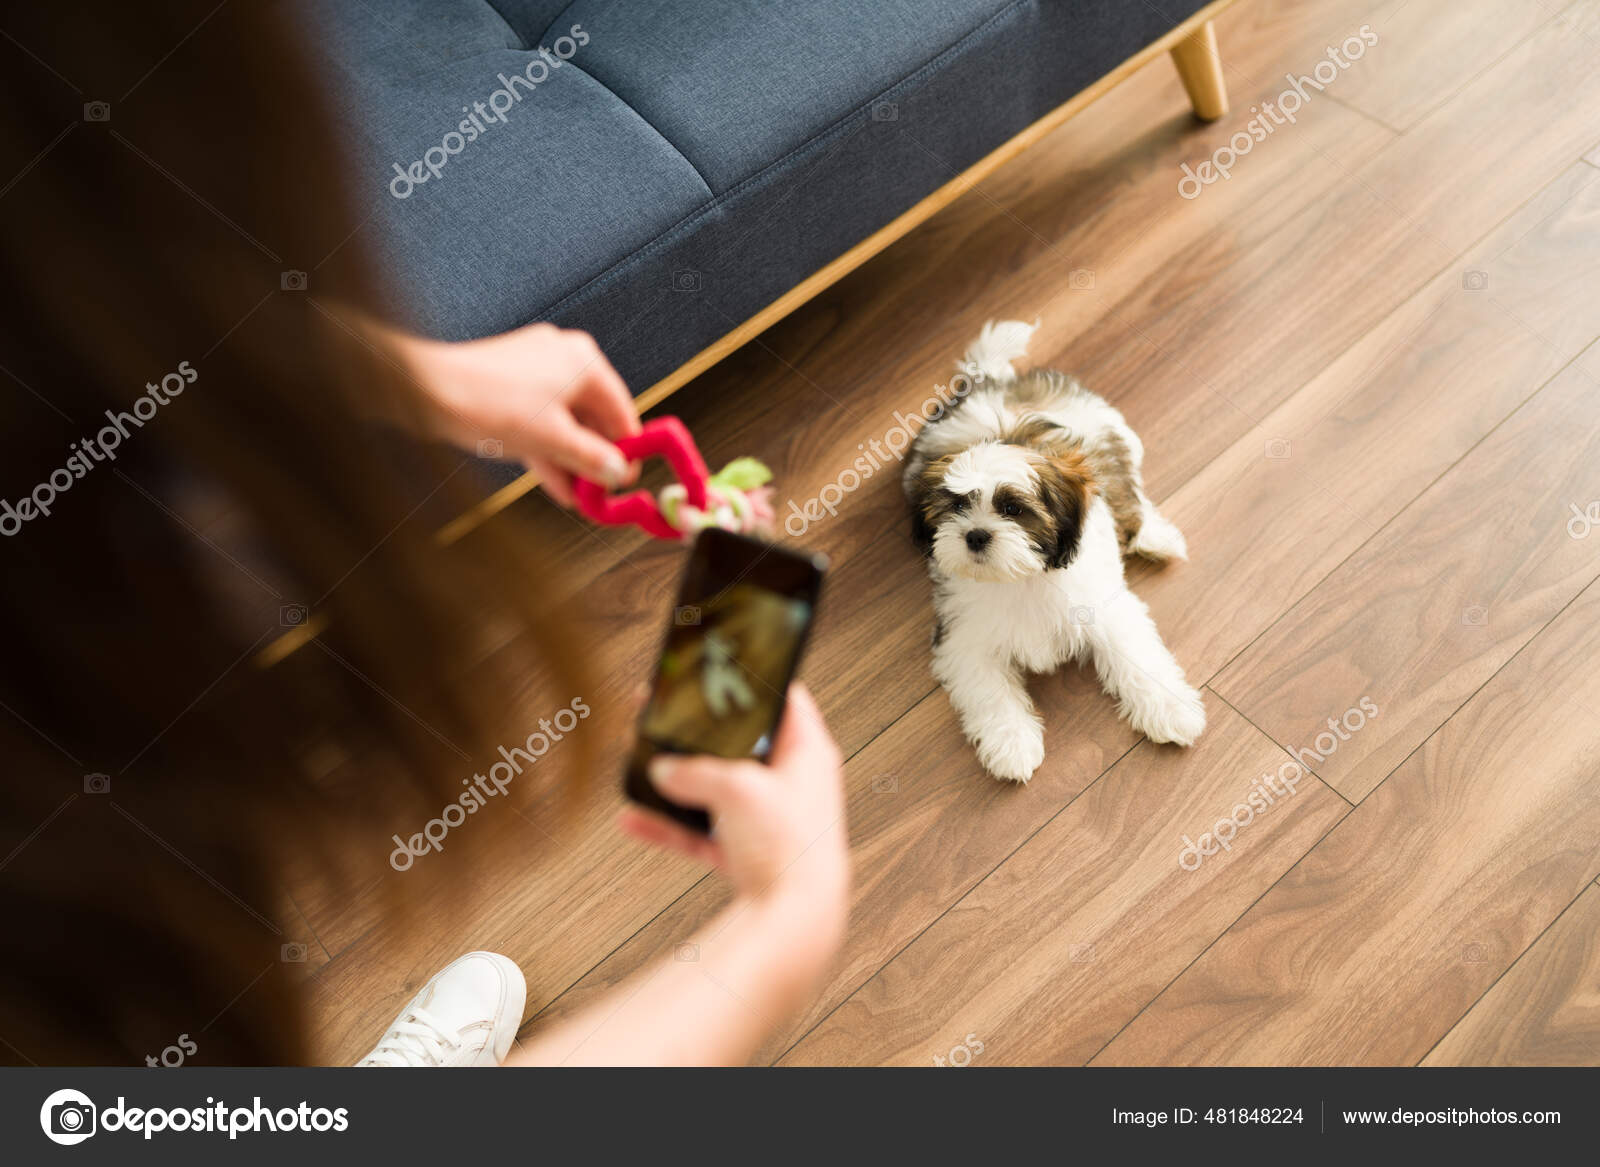 The Adorable and Cute Shih Tzu Puppy with Chew Toy